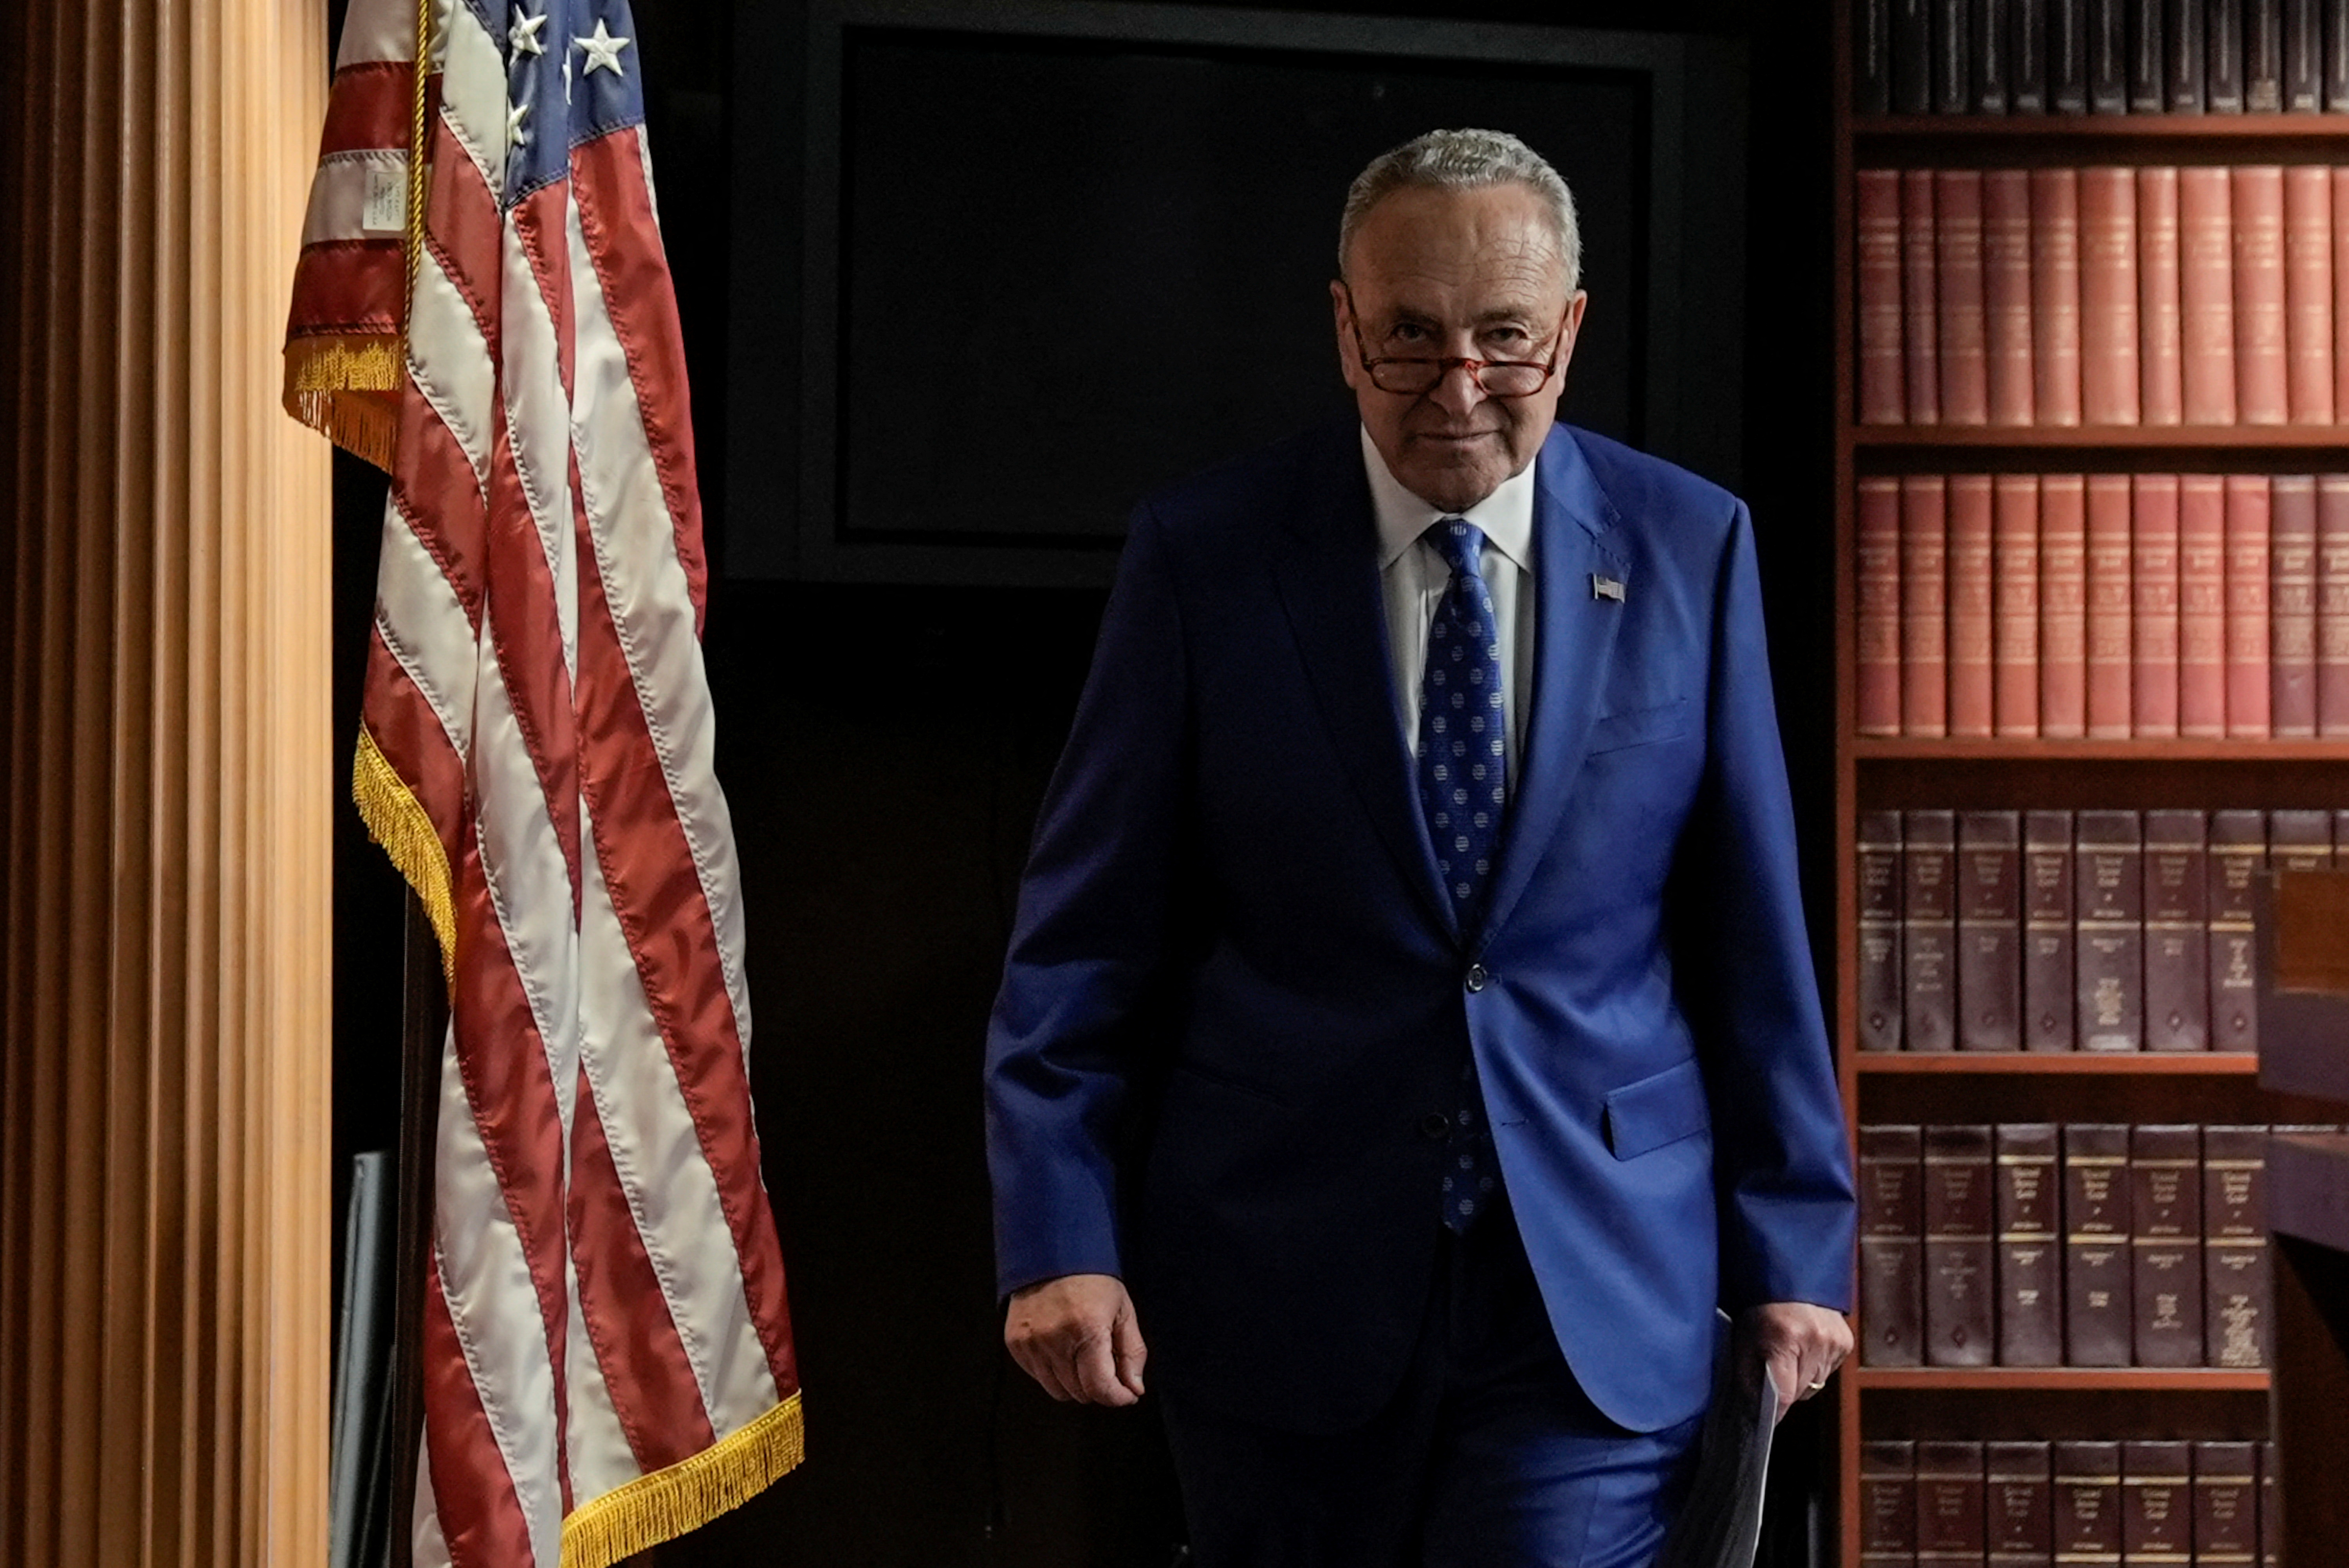 U.S. Senate Majority Leader Chuck Schumer on the passing of Inflation Reduction Act